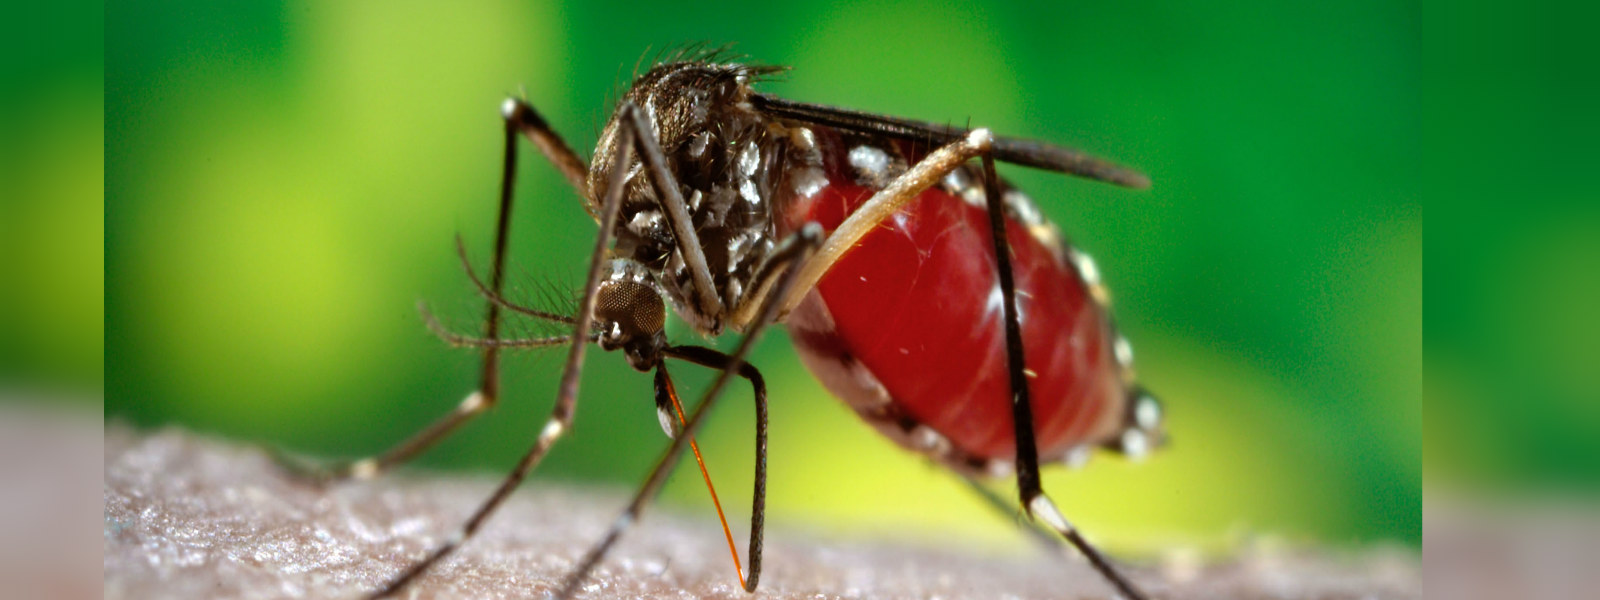 Over 87,000 dengue cases recorded in 2019